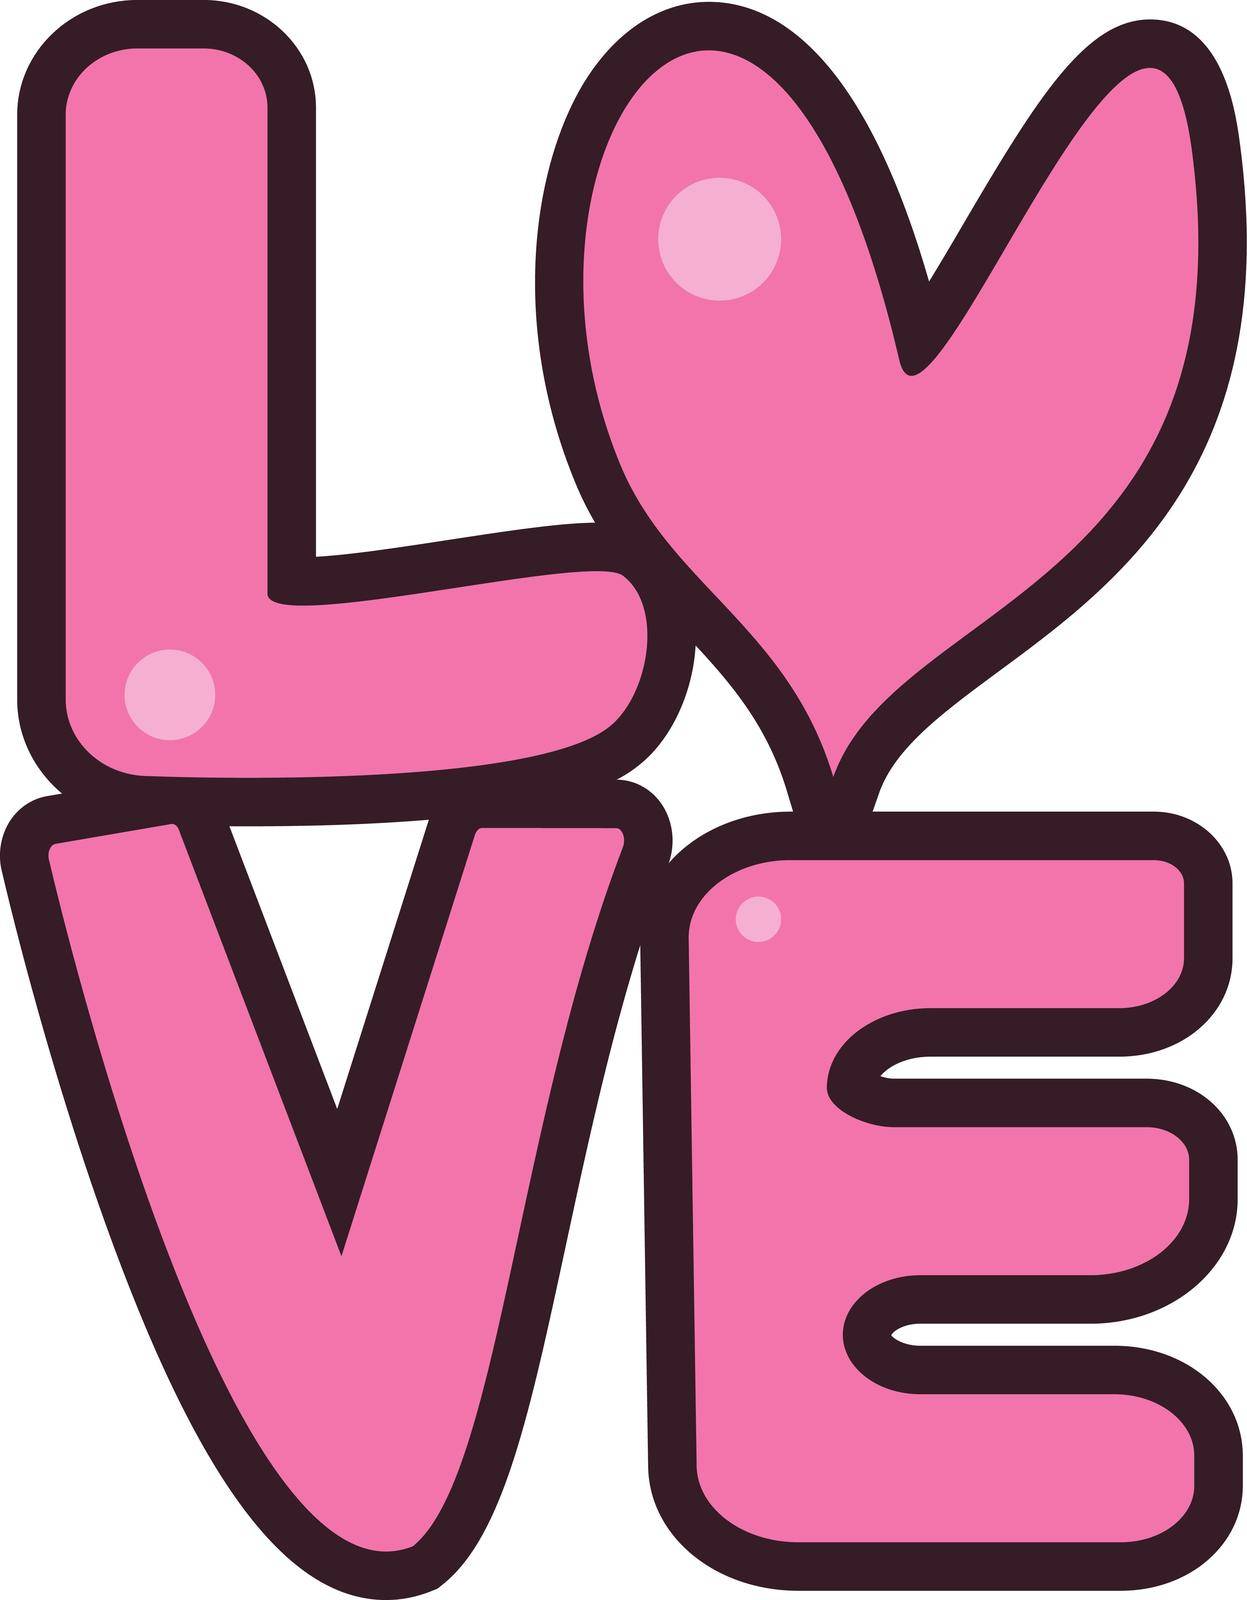 love Vector illustration on a transparent background.Premium quality symmbols.Vector line flat icon for concept and graphic design.